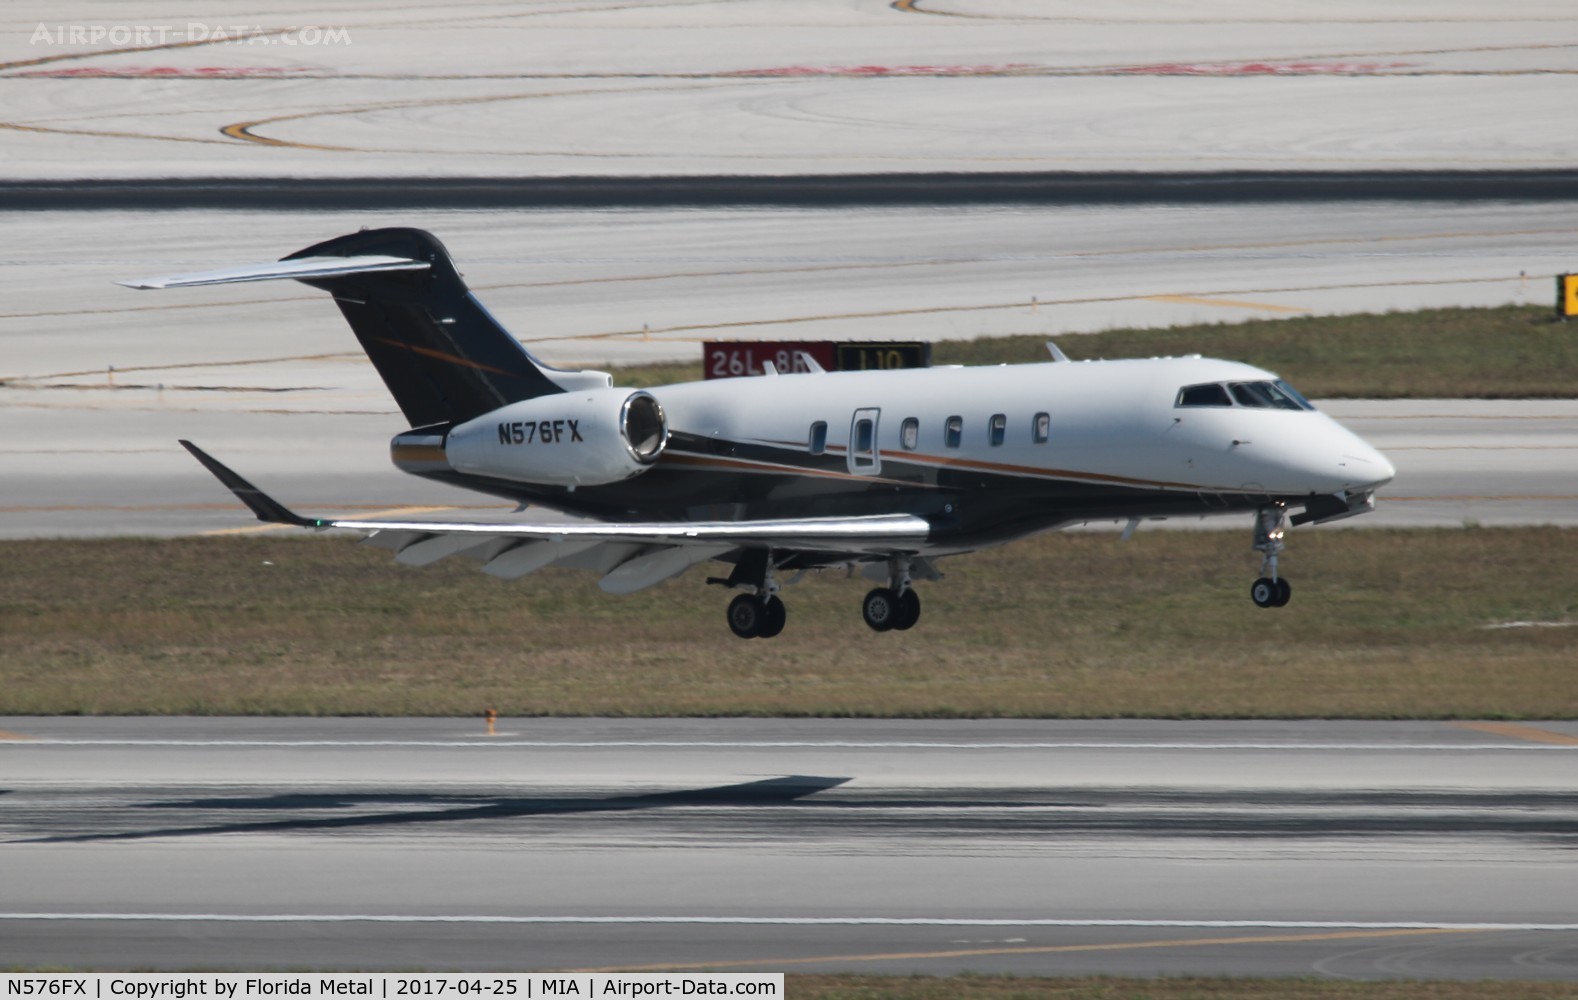 N576FX, 2015 Bombardier Challenger 350 (BD-100-1A10) C/N 20585, Challenger 350